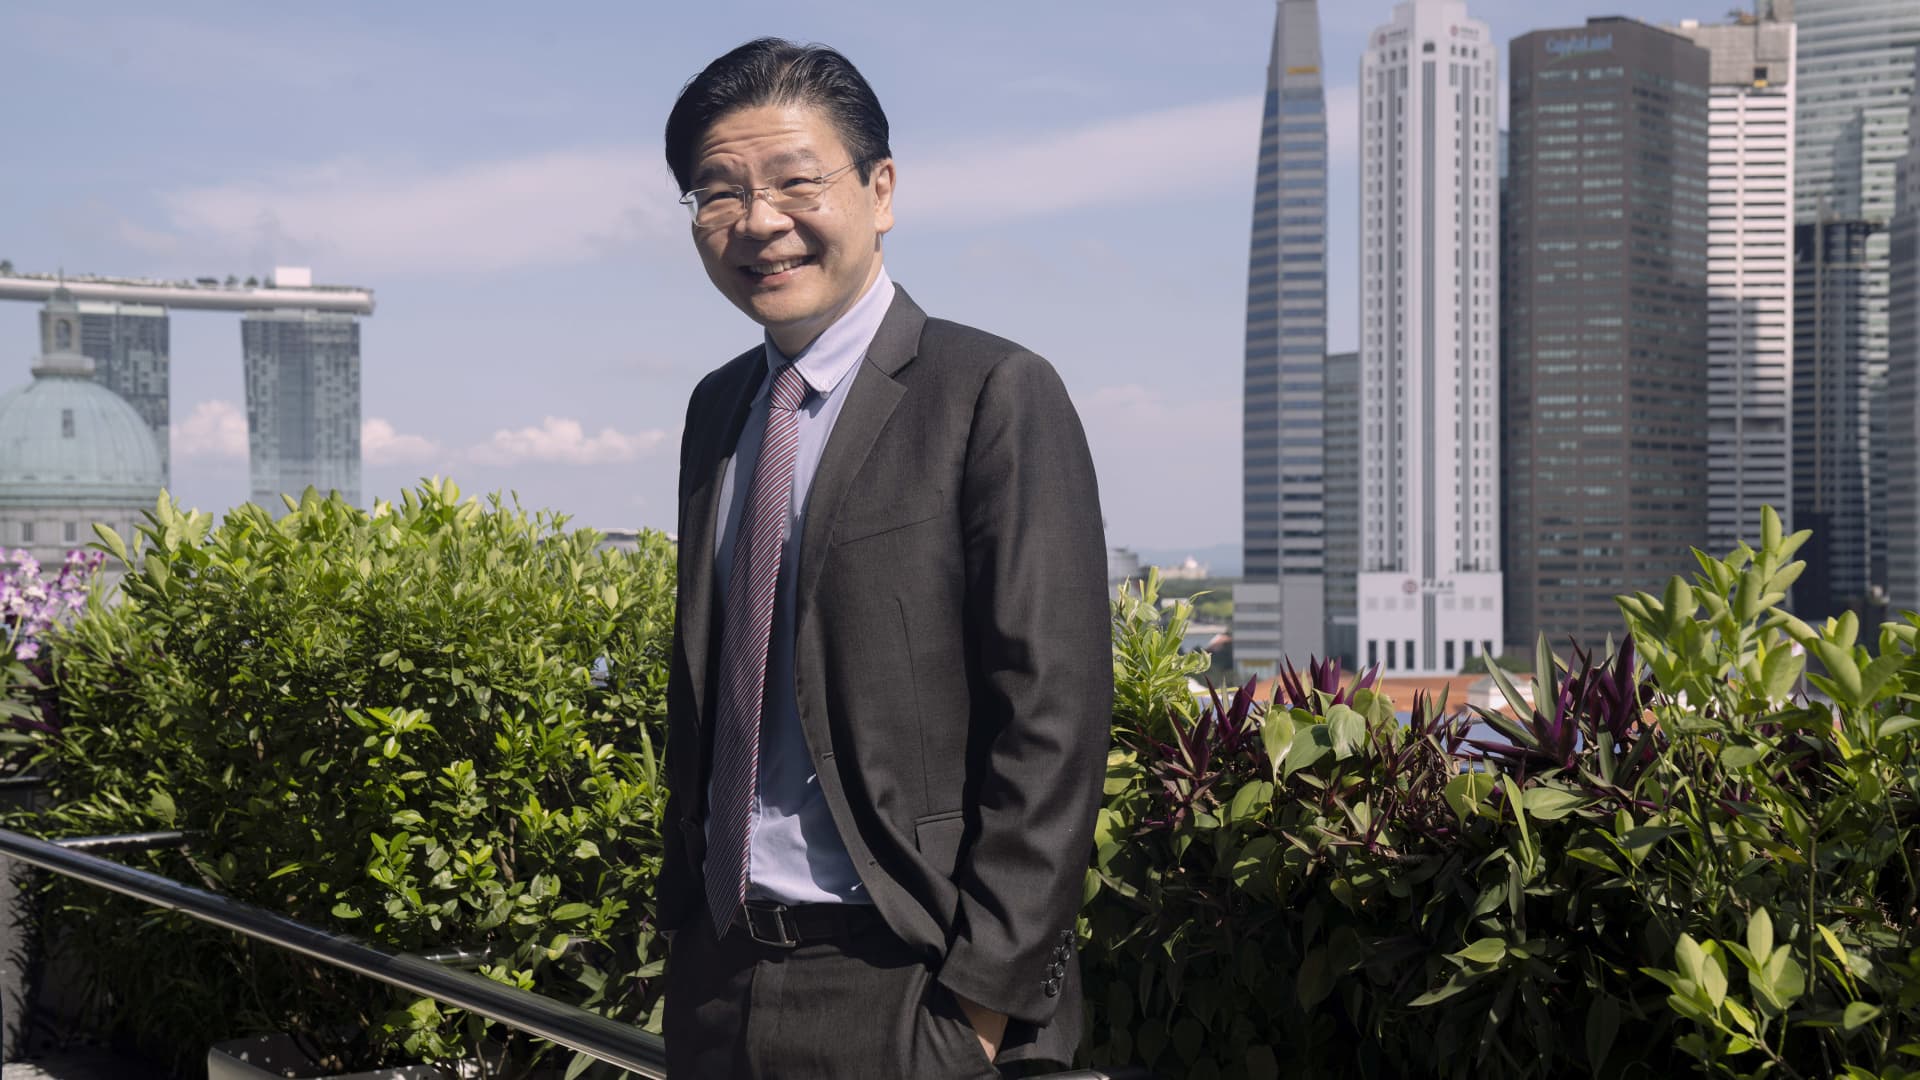 Singapore's new Prime Minister Lawrence Wong will take office on May 15